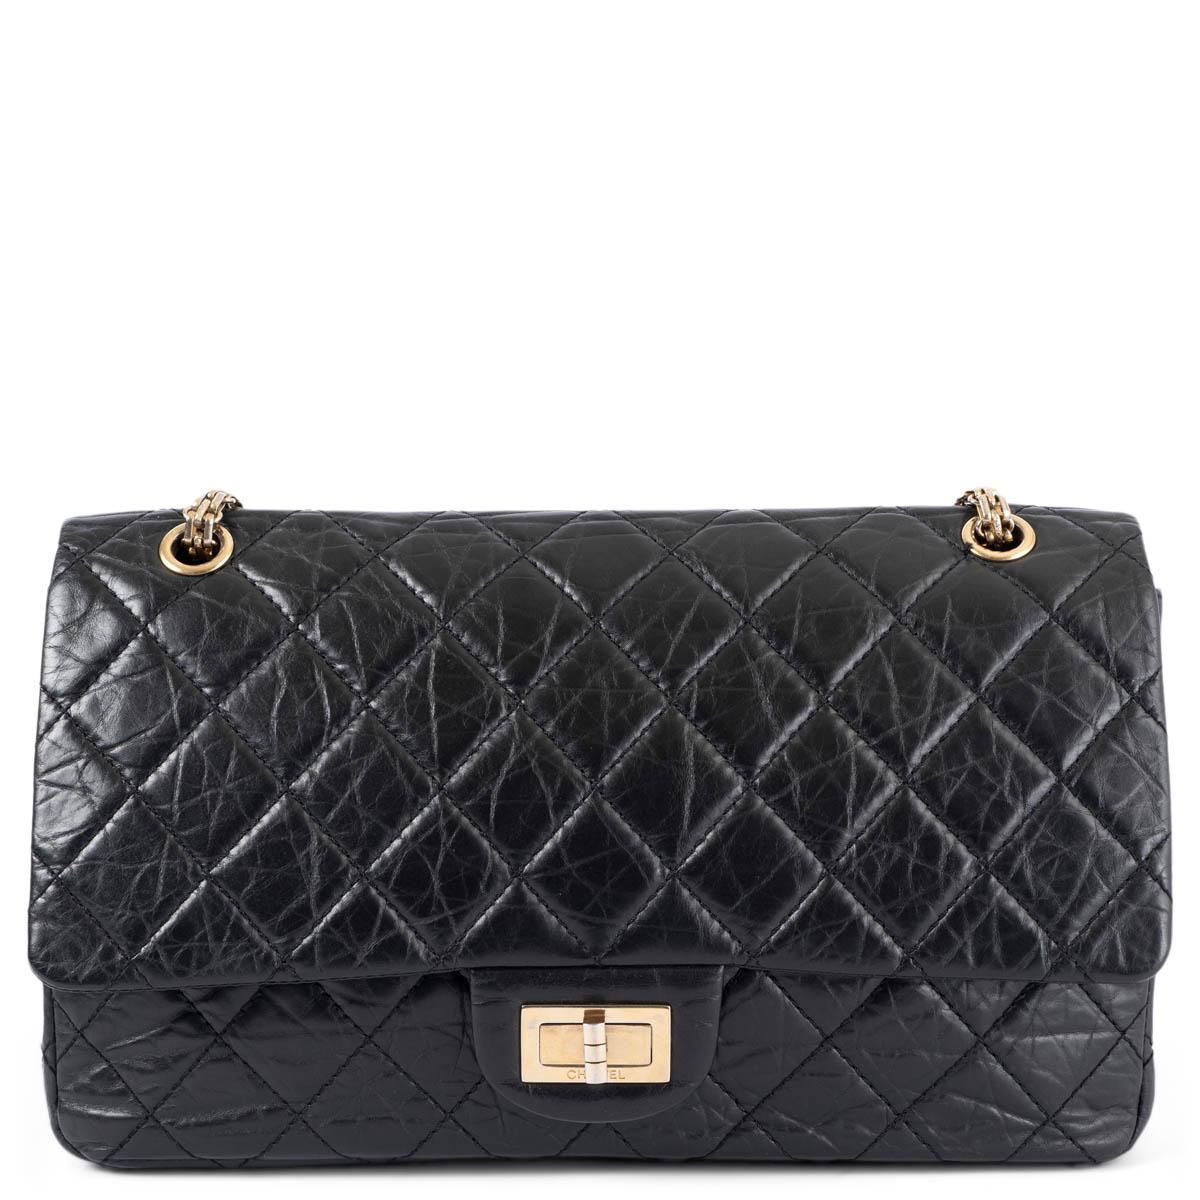 CHANEL black quilted aged leather 2.55 227 REISSUE MAXI FLAP Shoulder Bag For Sale